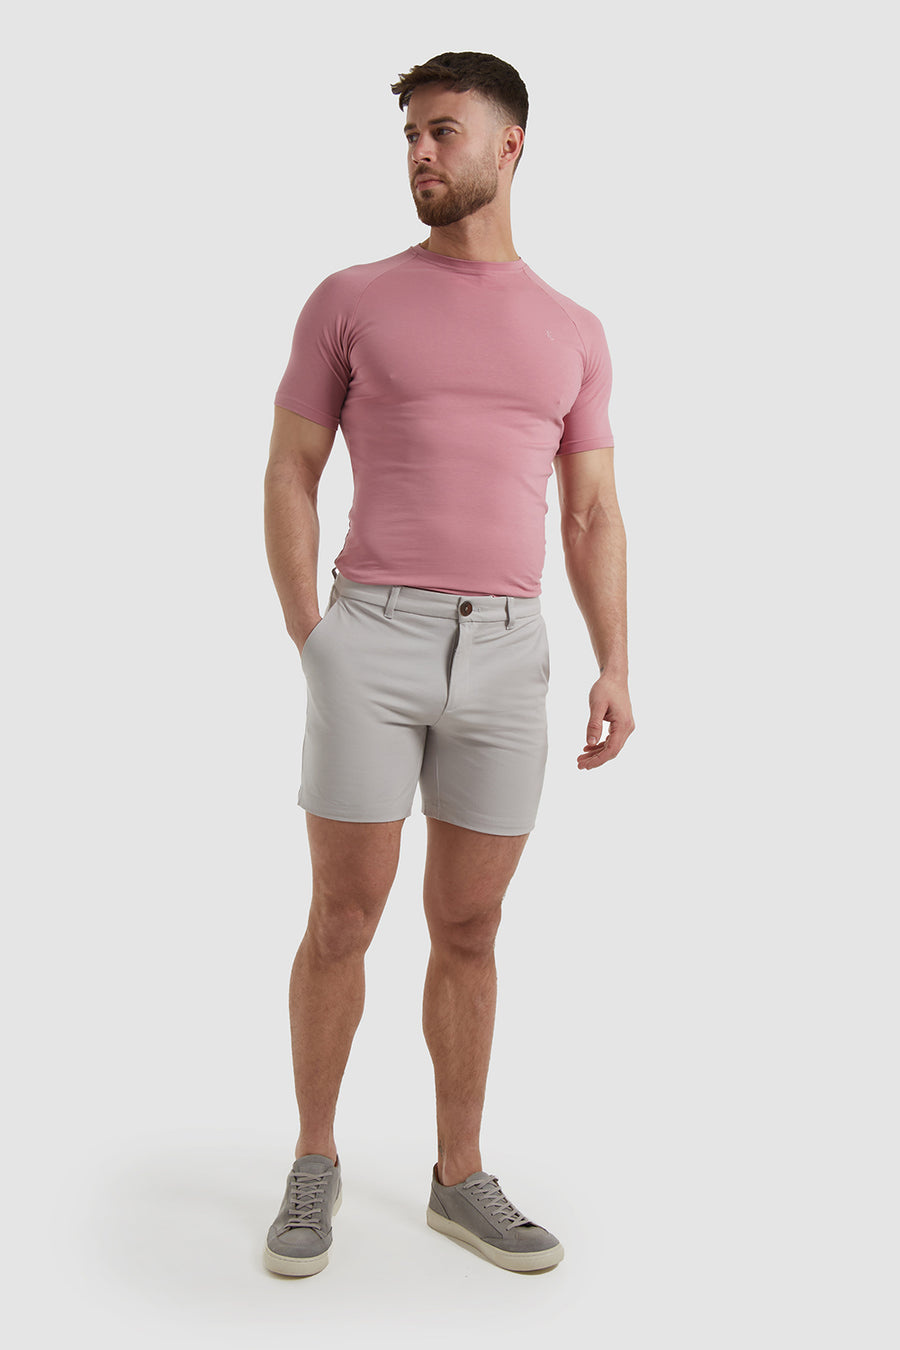 Athletic Fit Shorter Length Chino Shorts in Pale Grey - TAILORED ATHLETE - USA